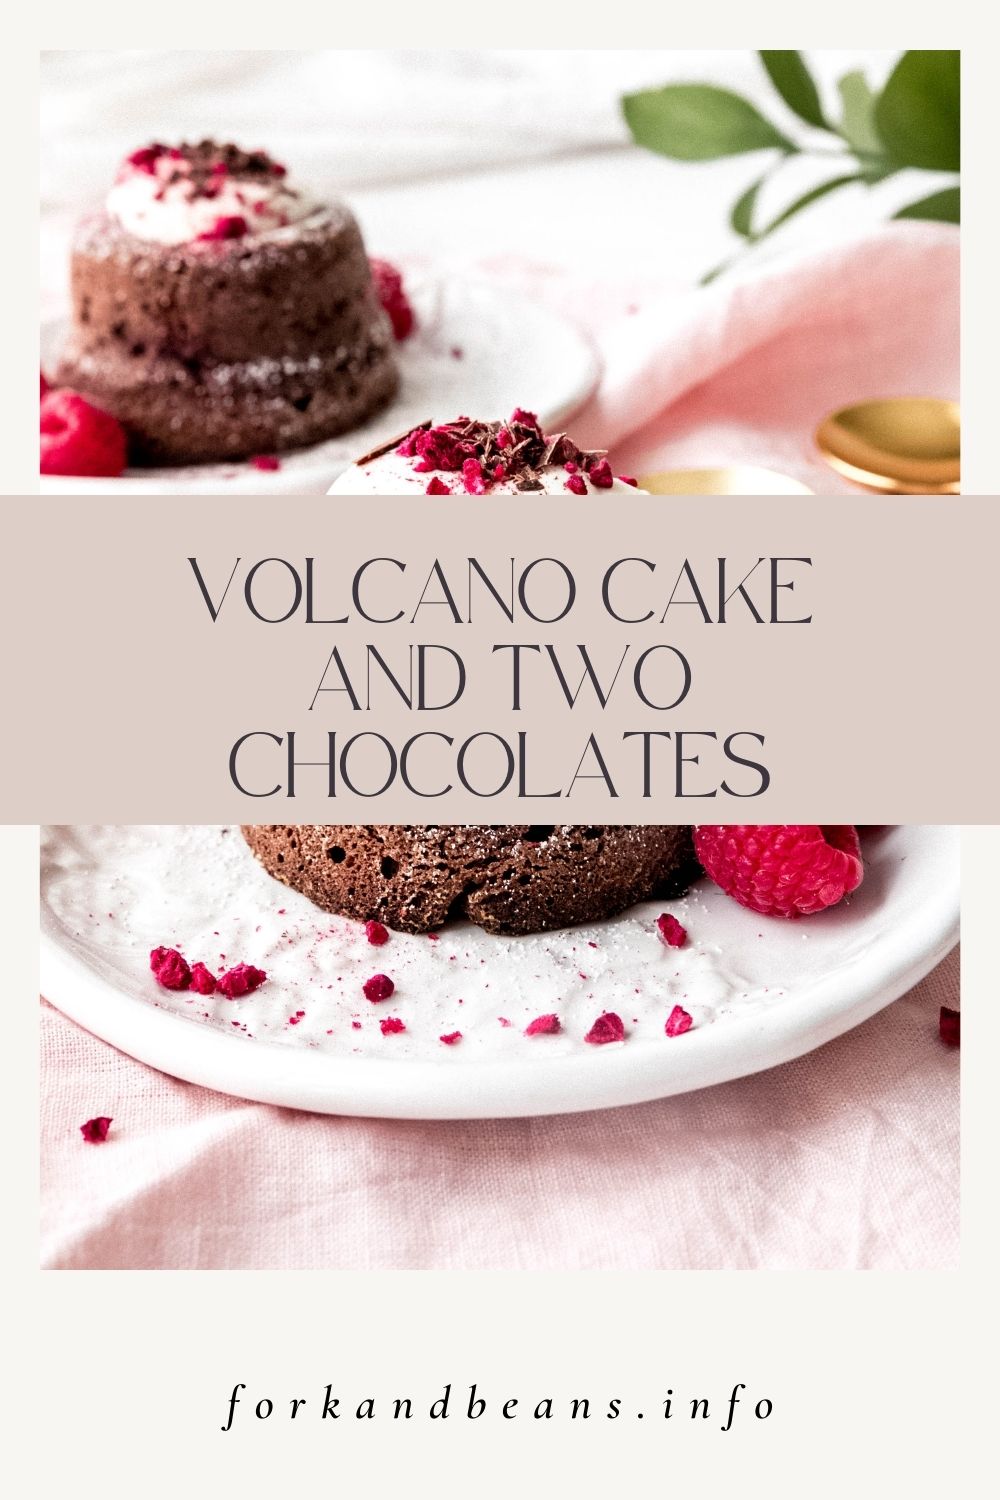 For two, smoldering raspberry-chocolate lava cakes